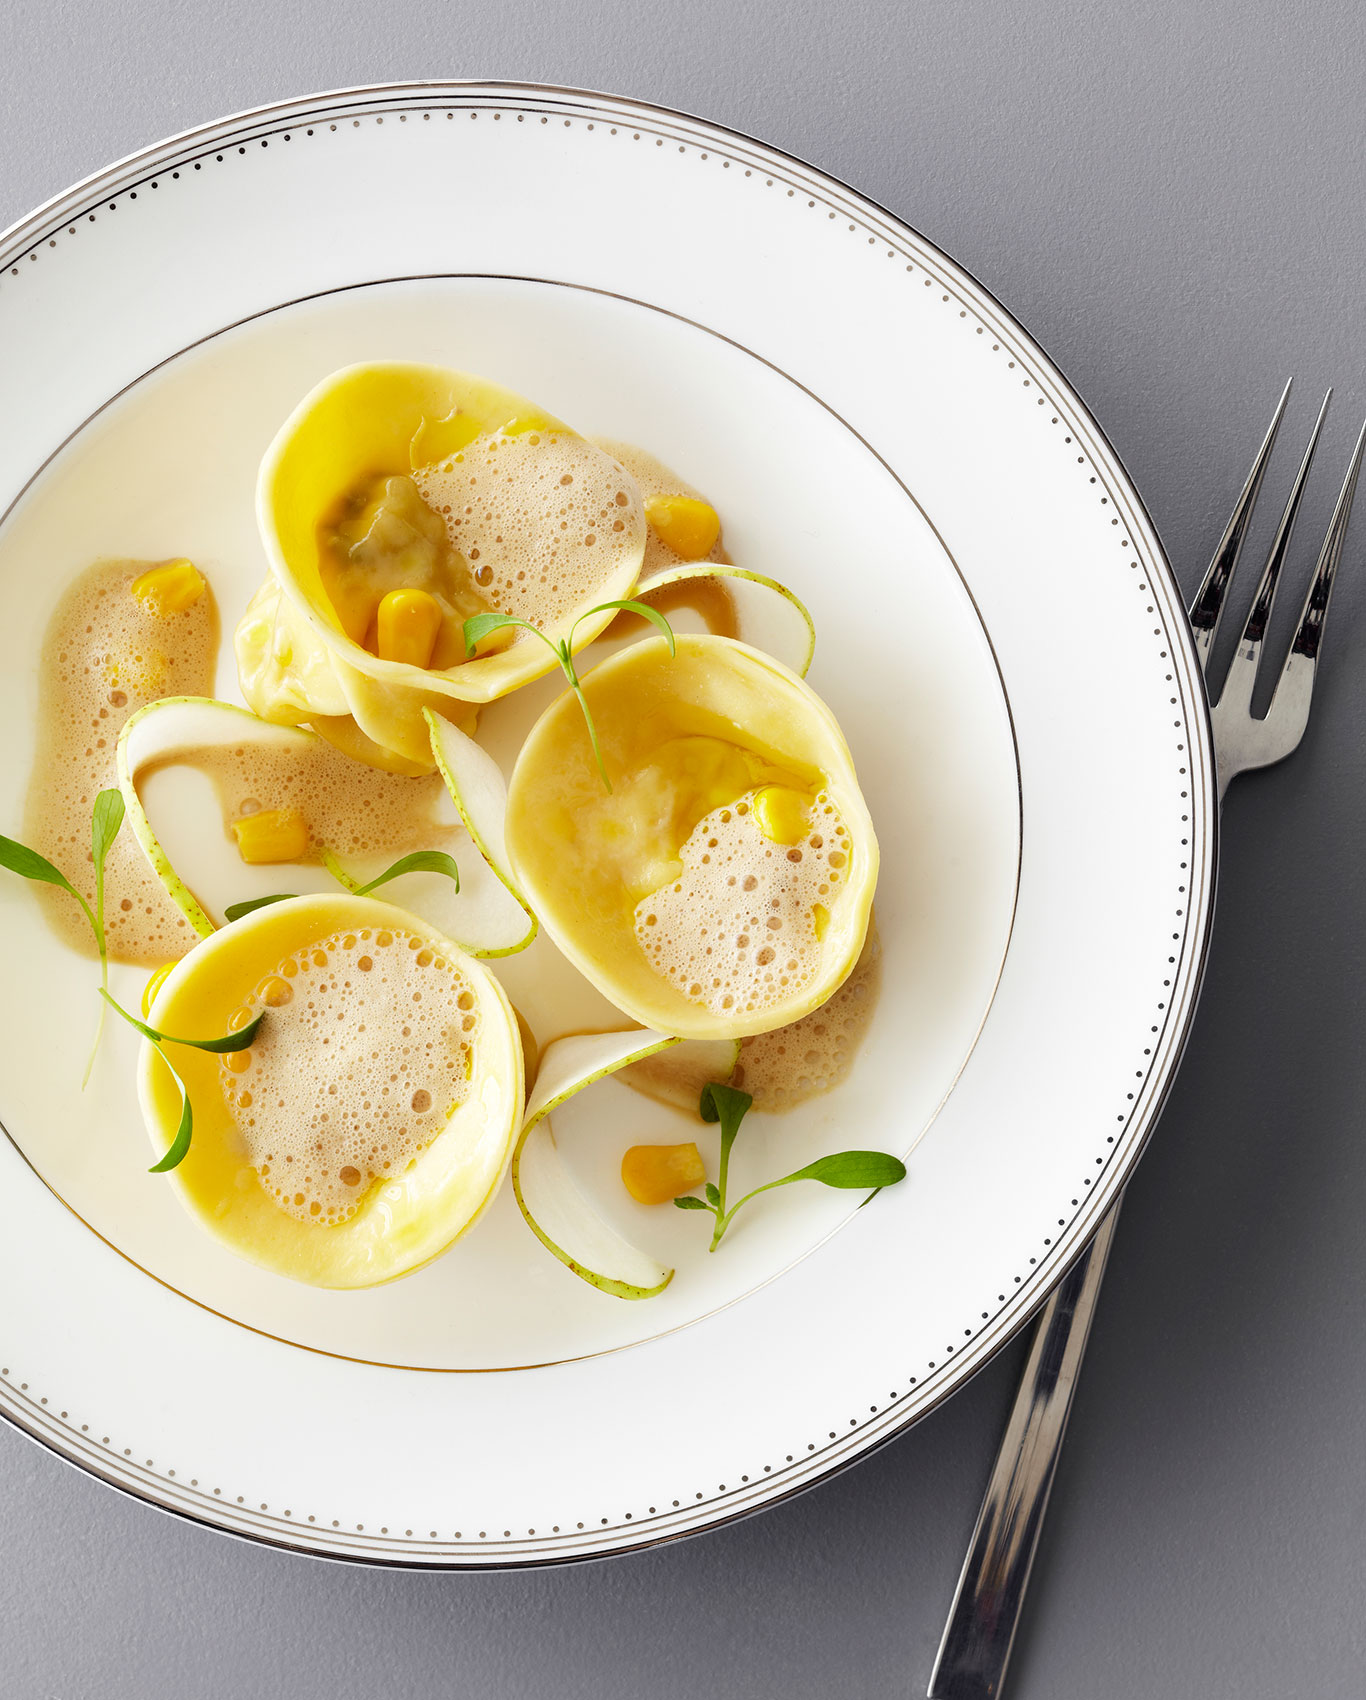 Southon Cooking • The Foodstore Scampi Ravioli with Pear Ribbons • Hospitality & Editorial Food Photography